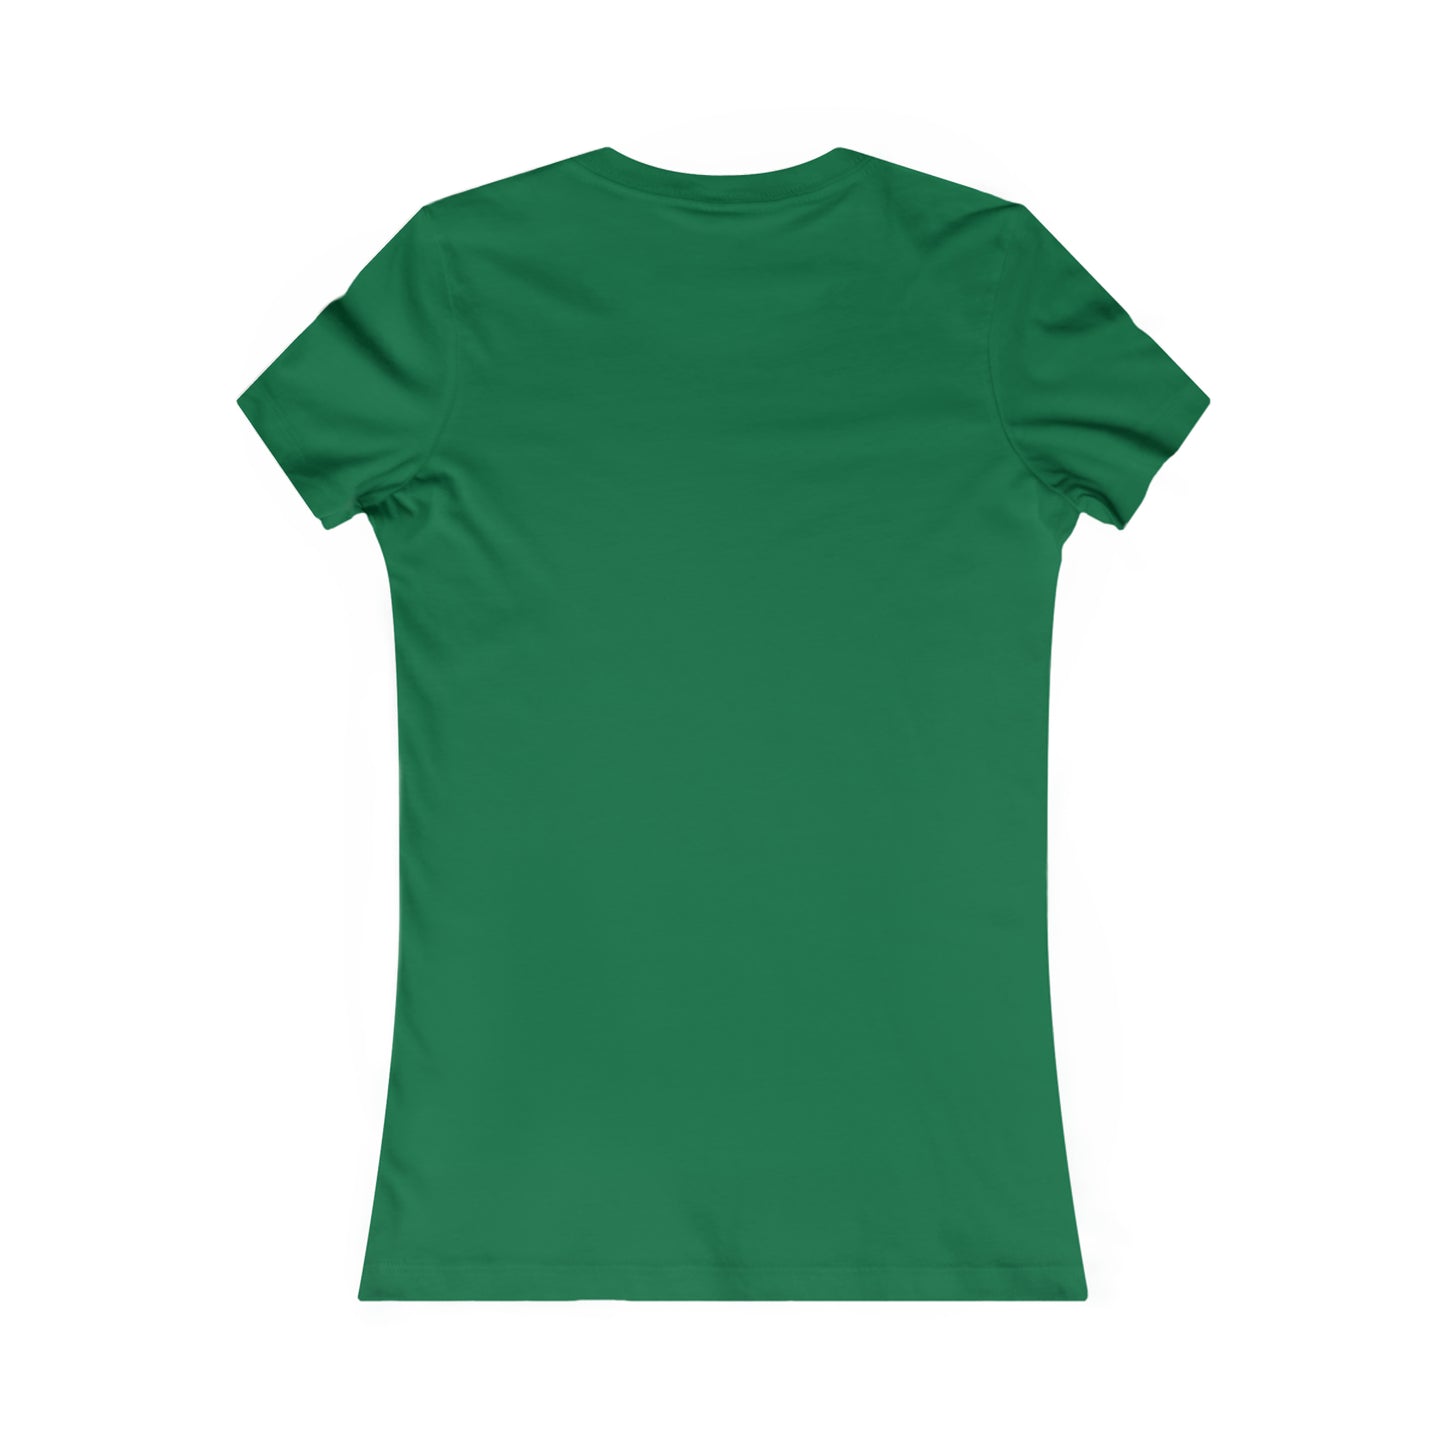 Naturally Nature Mom's Favorite Tee, Available in Three Colors!